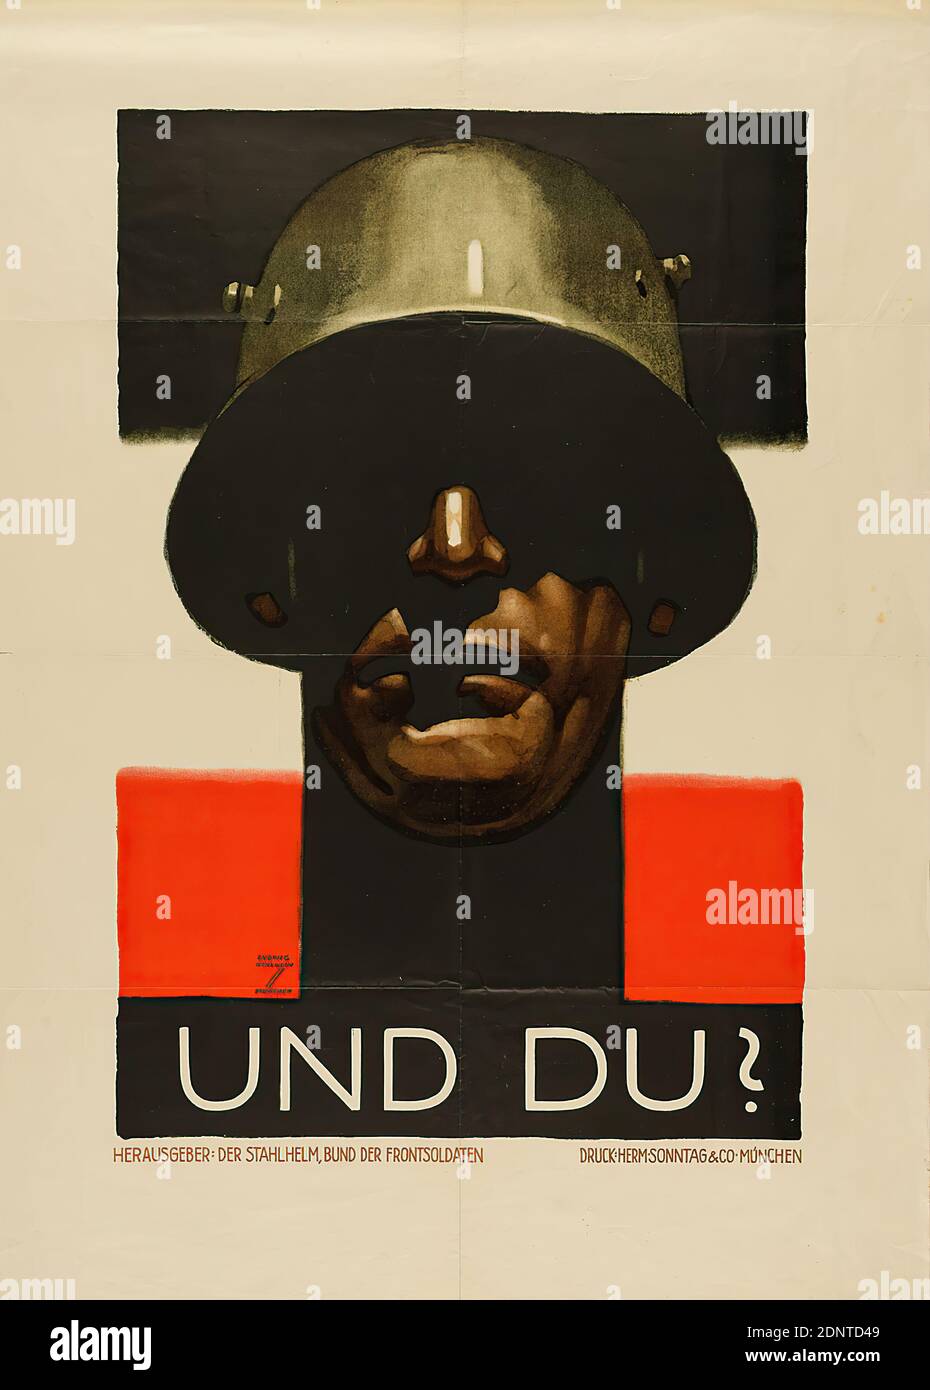 Ludwig Hohlwein, Hermann Sonntag & Co, Und Du?, paper, lithograph, total: height: 83,5 cm; width: 59,7 cm, signed: recto u. li. in print: LUDWIG HOHLWEIN, MUNICH, war posters, propaganda posters, warfare/military, defense, soldier, flag, color (state symbol Stock Photo